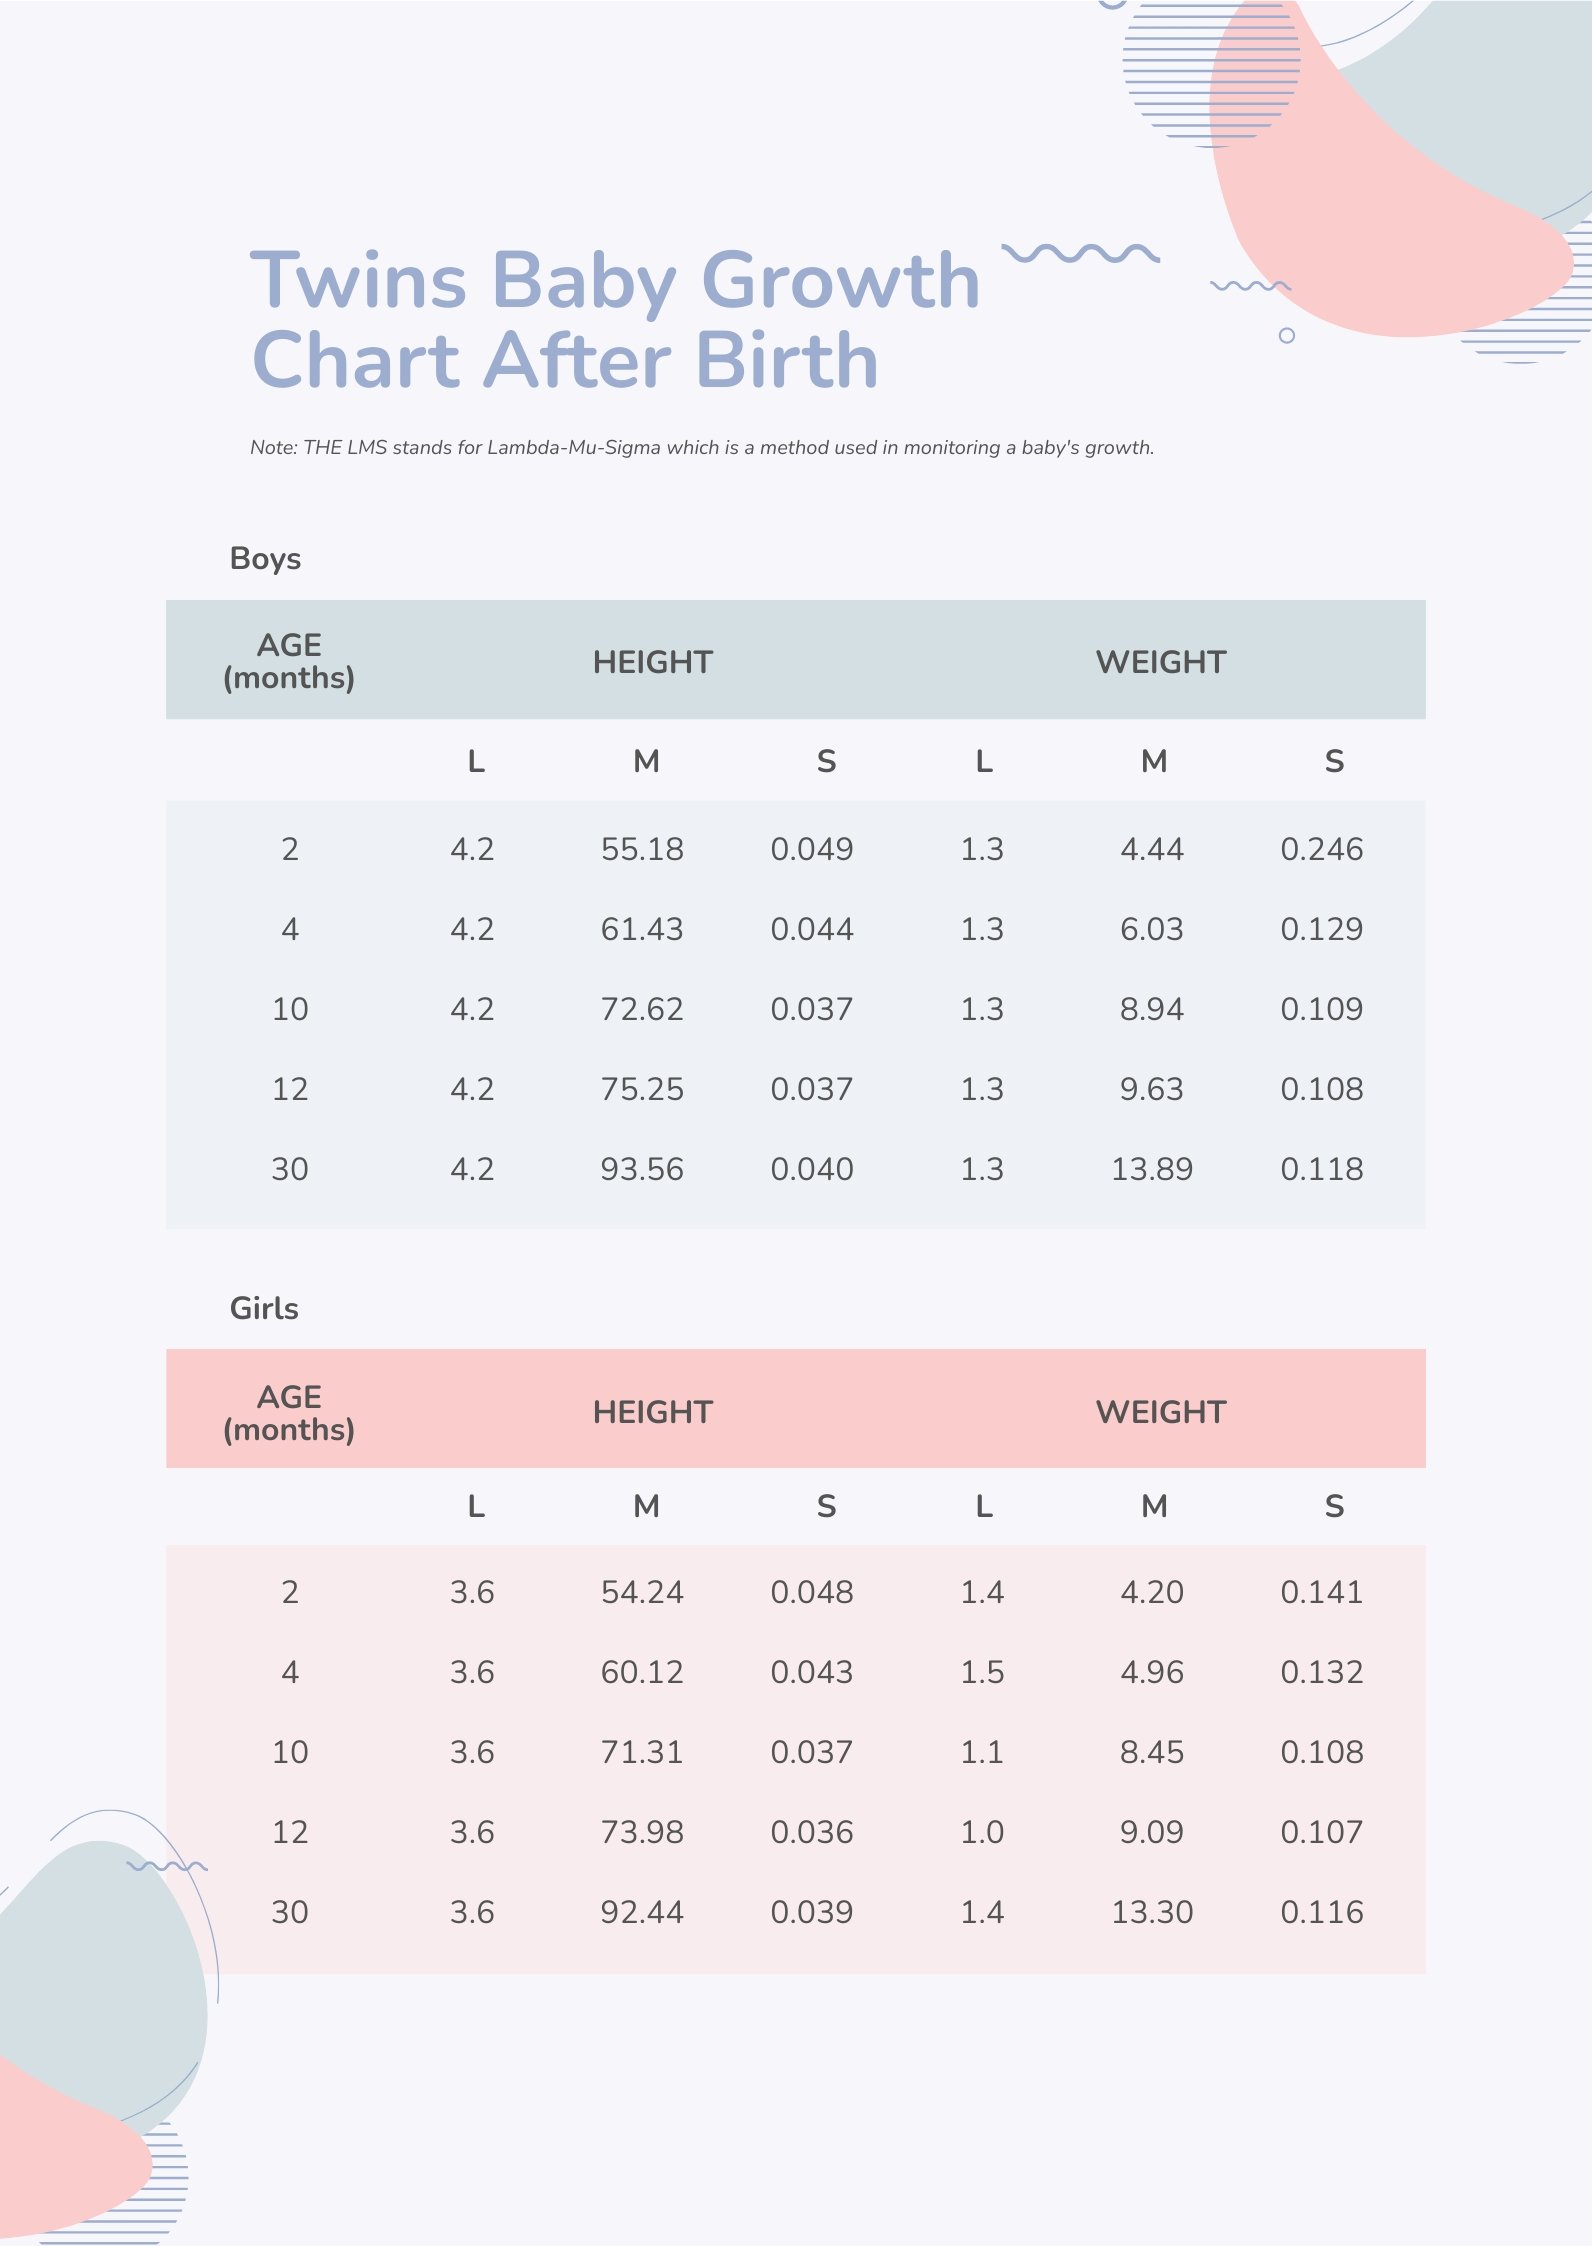 Twin Baby Growth Chart After Birth in PDF